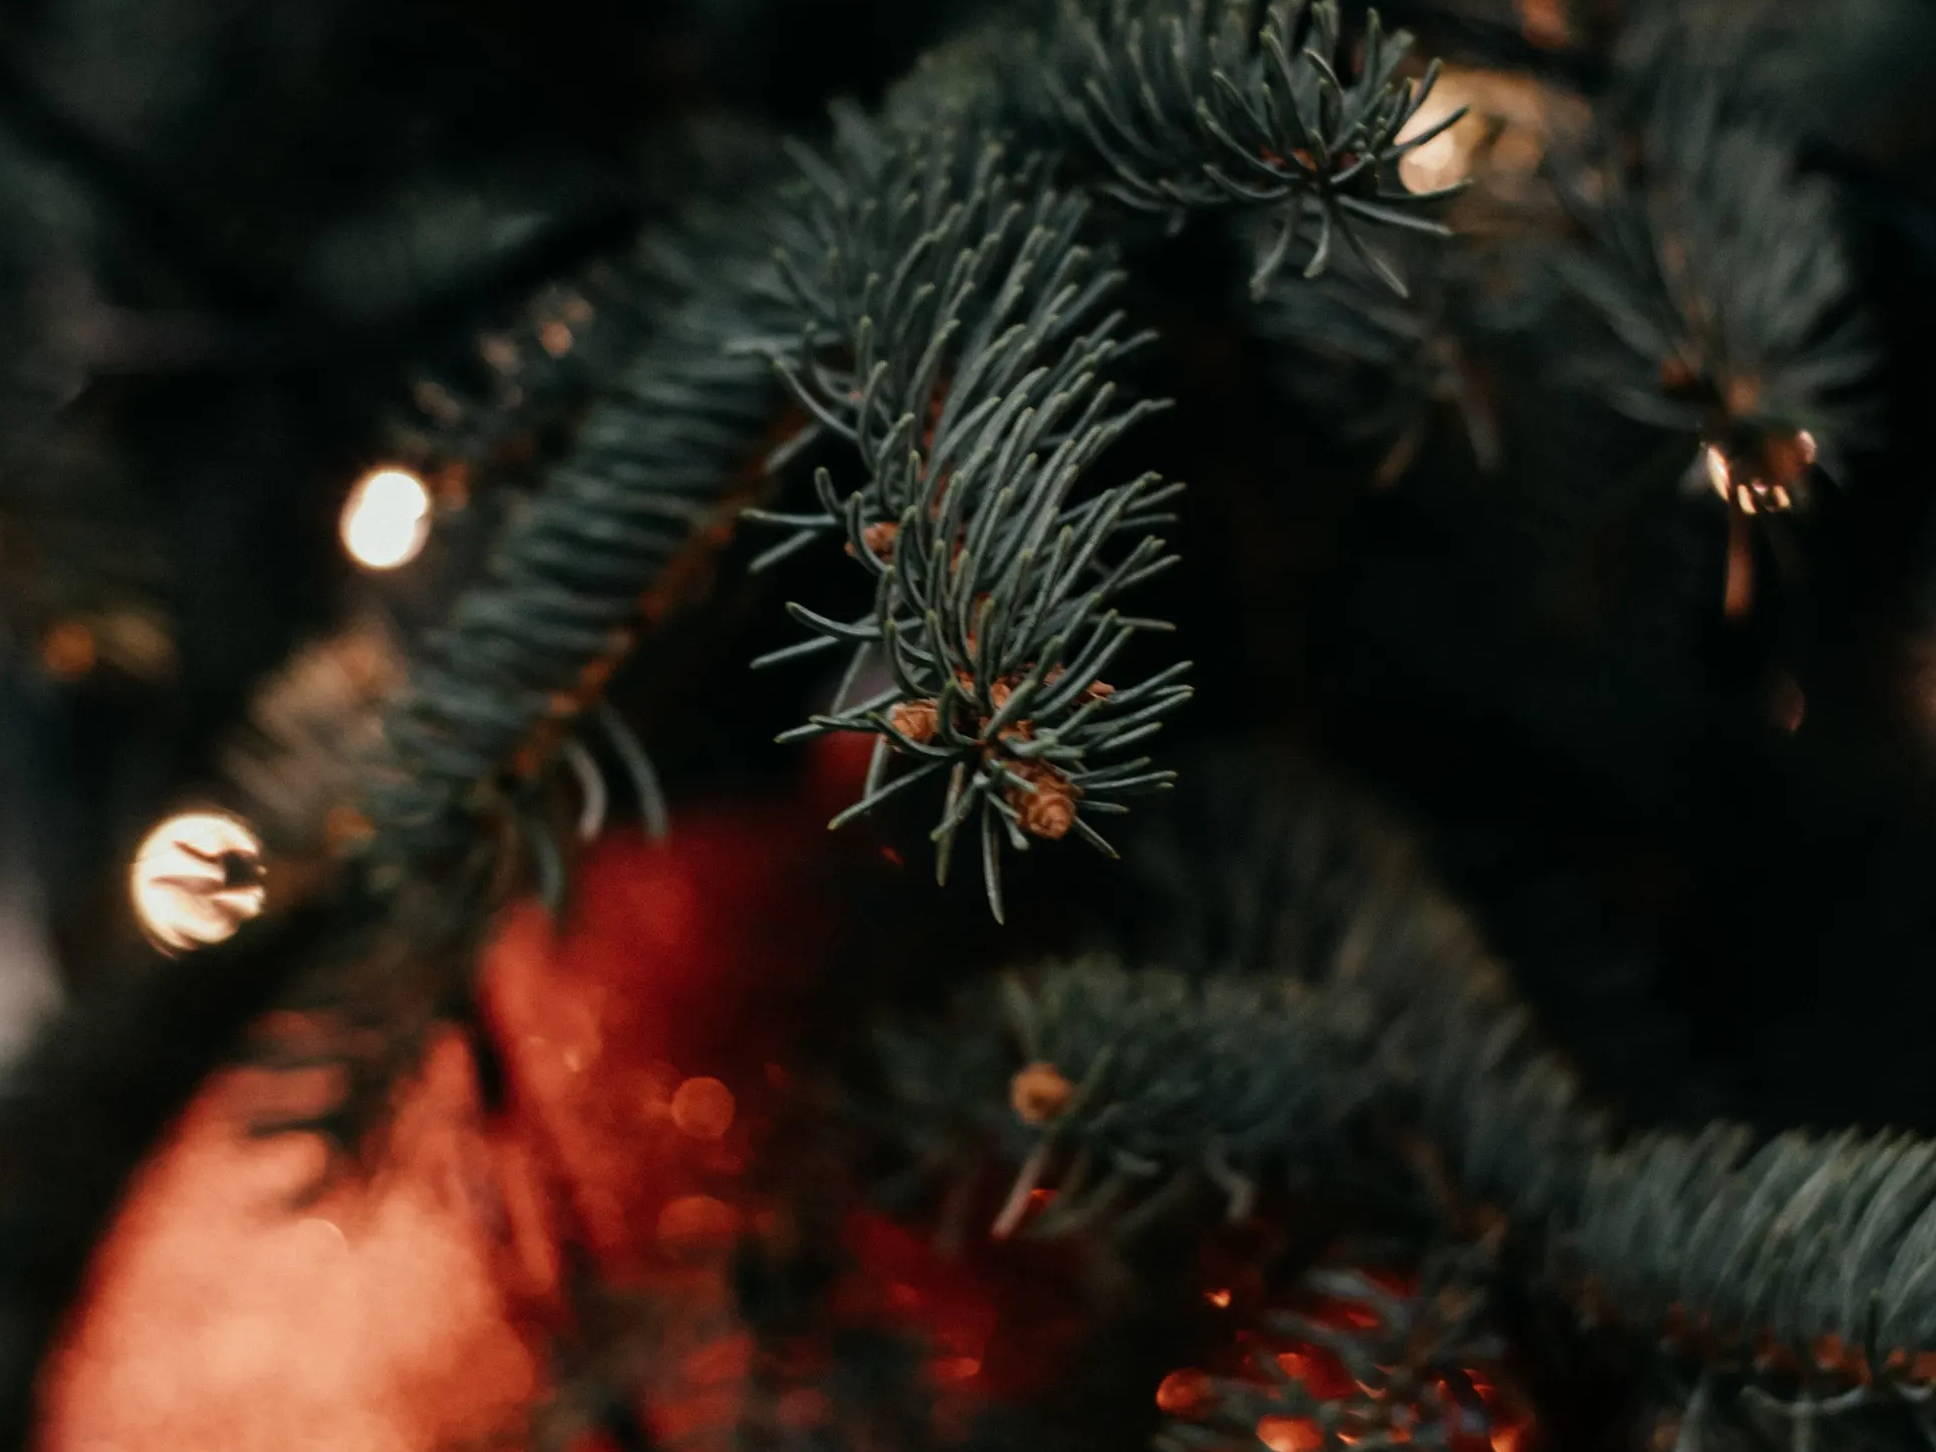 Close-up of an ornament in a Christmas tree